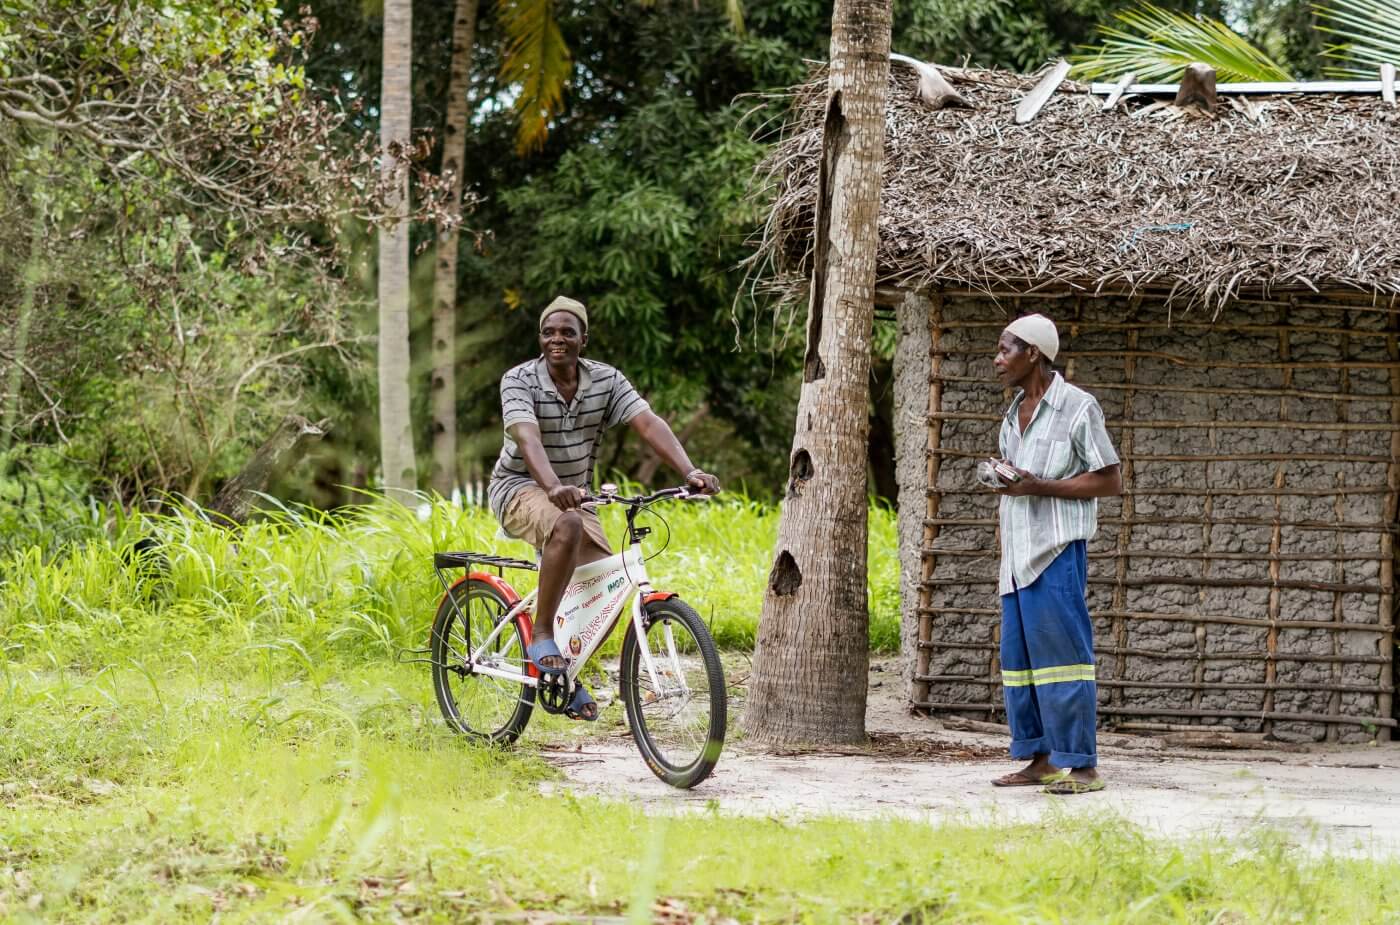 A tropical scene with a man riding a red and white mozambike bicycle and another man standing next to a bamboo hut with a thatched roof. Both men are wearing striped shirts and the background is filled with lush greenery.